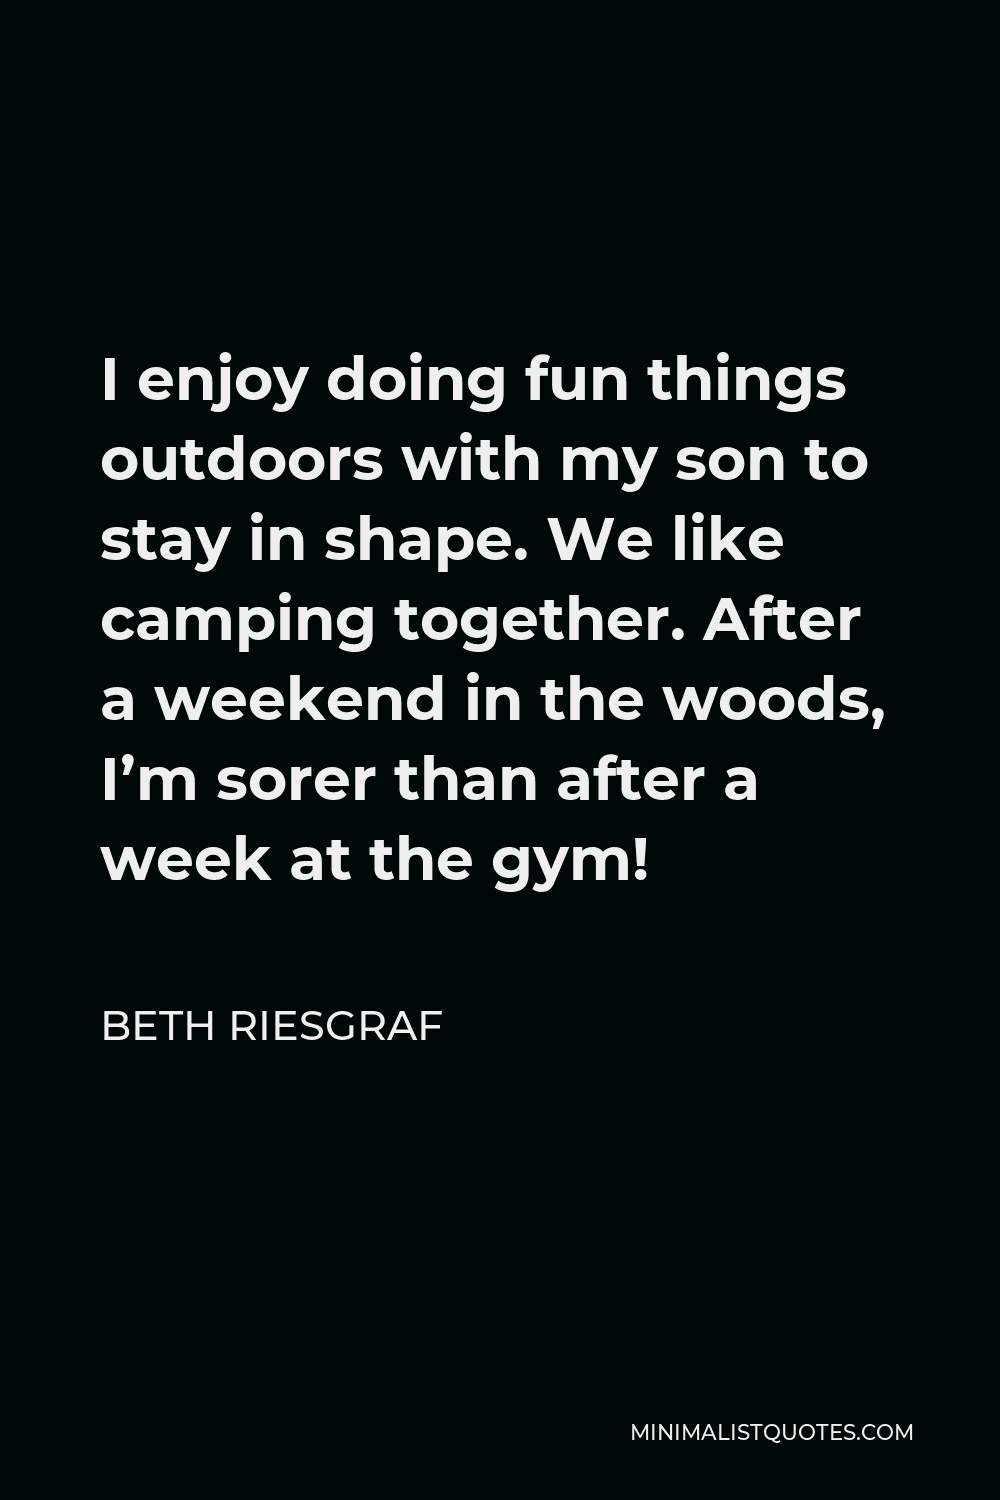 Beth Riesgraf Quote - I enjoy doing fun things outdoors with my son to stay in shape. We like camping together. After a weekend in the woods, I’m sorer than after a week at the gym!